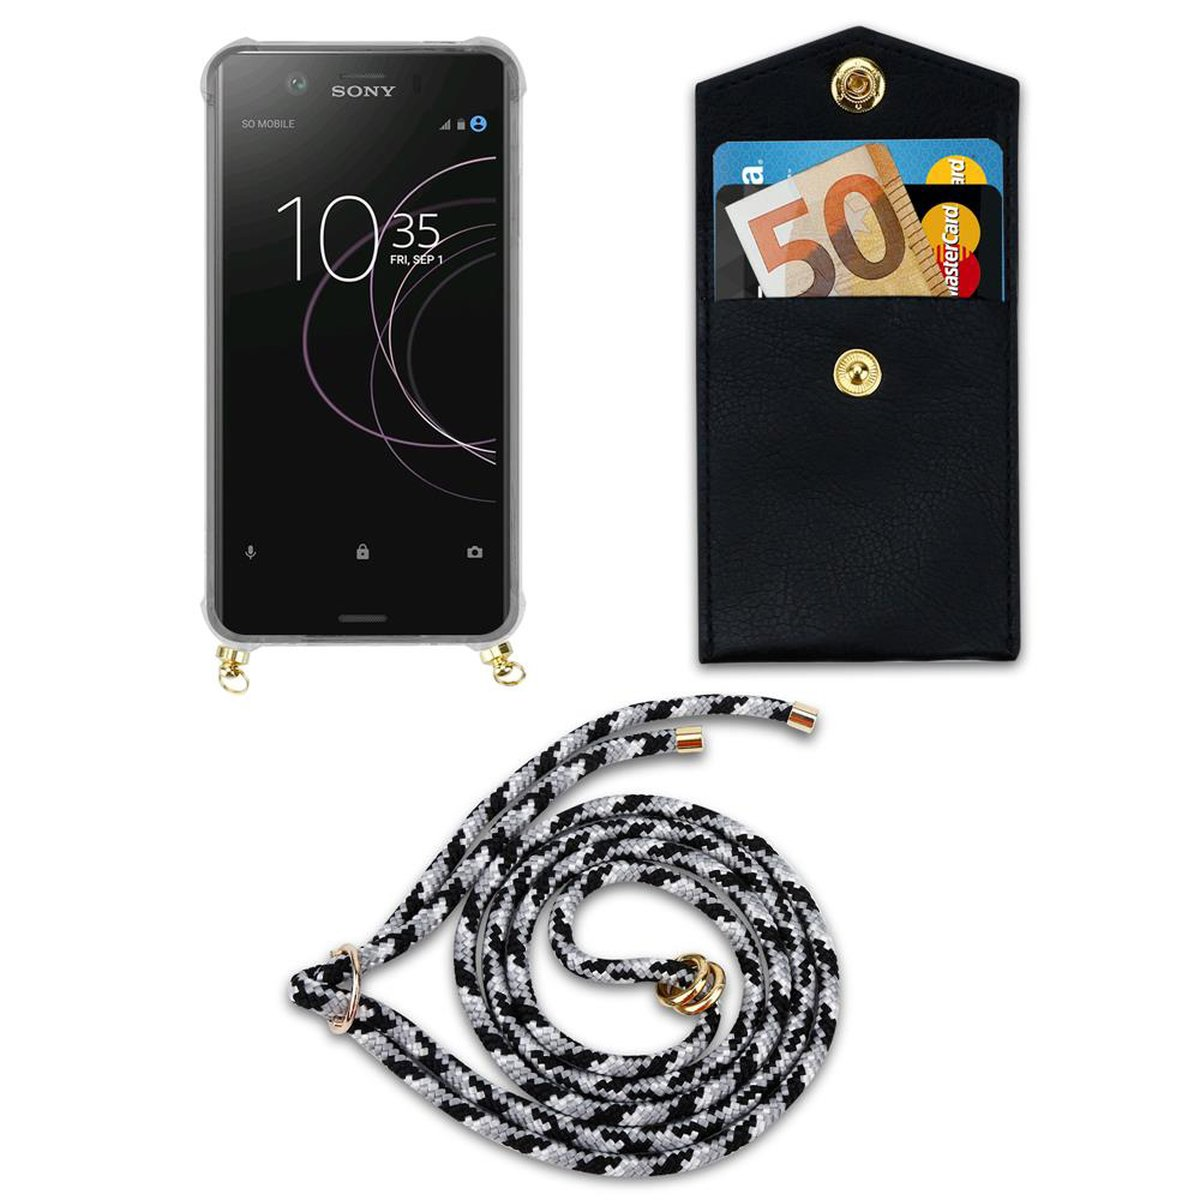 Xperia XZ1, Band Kordel Backcover, Kette mit Handy abnehmbarer CAMOUFLAGE Hülle, Ringen, Sony, SCHWARZ CADORABO Gold und